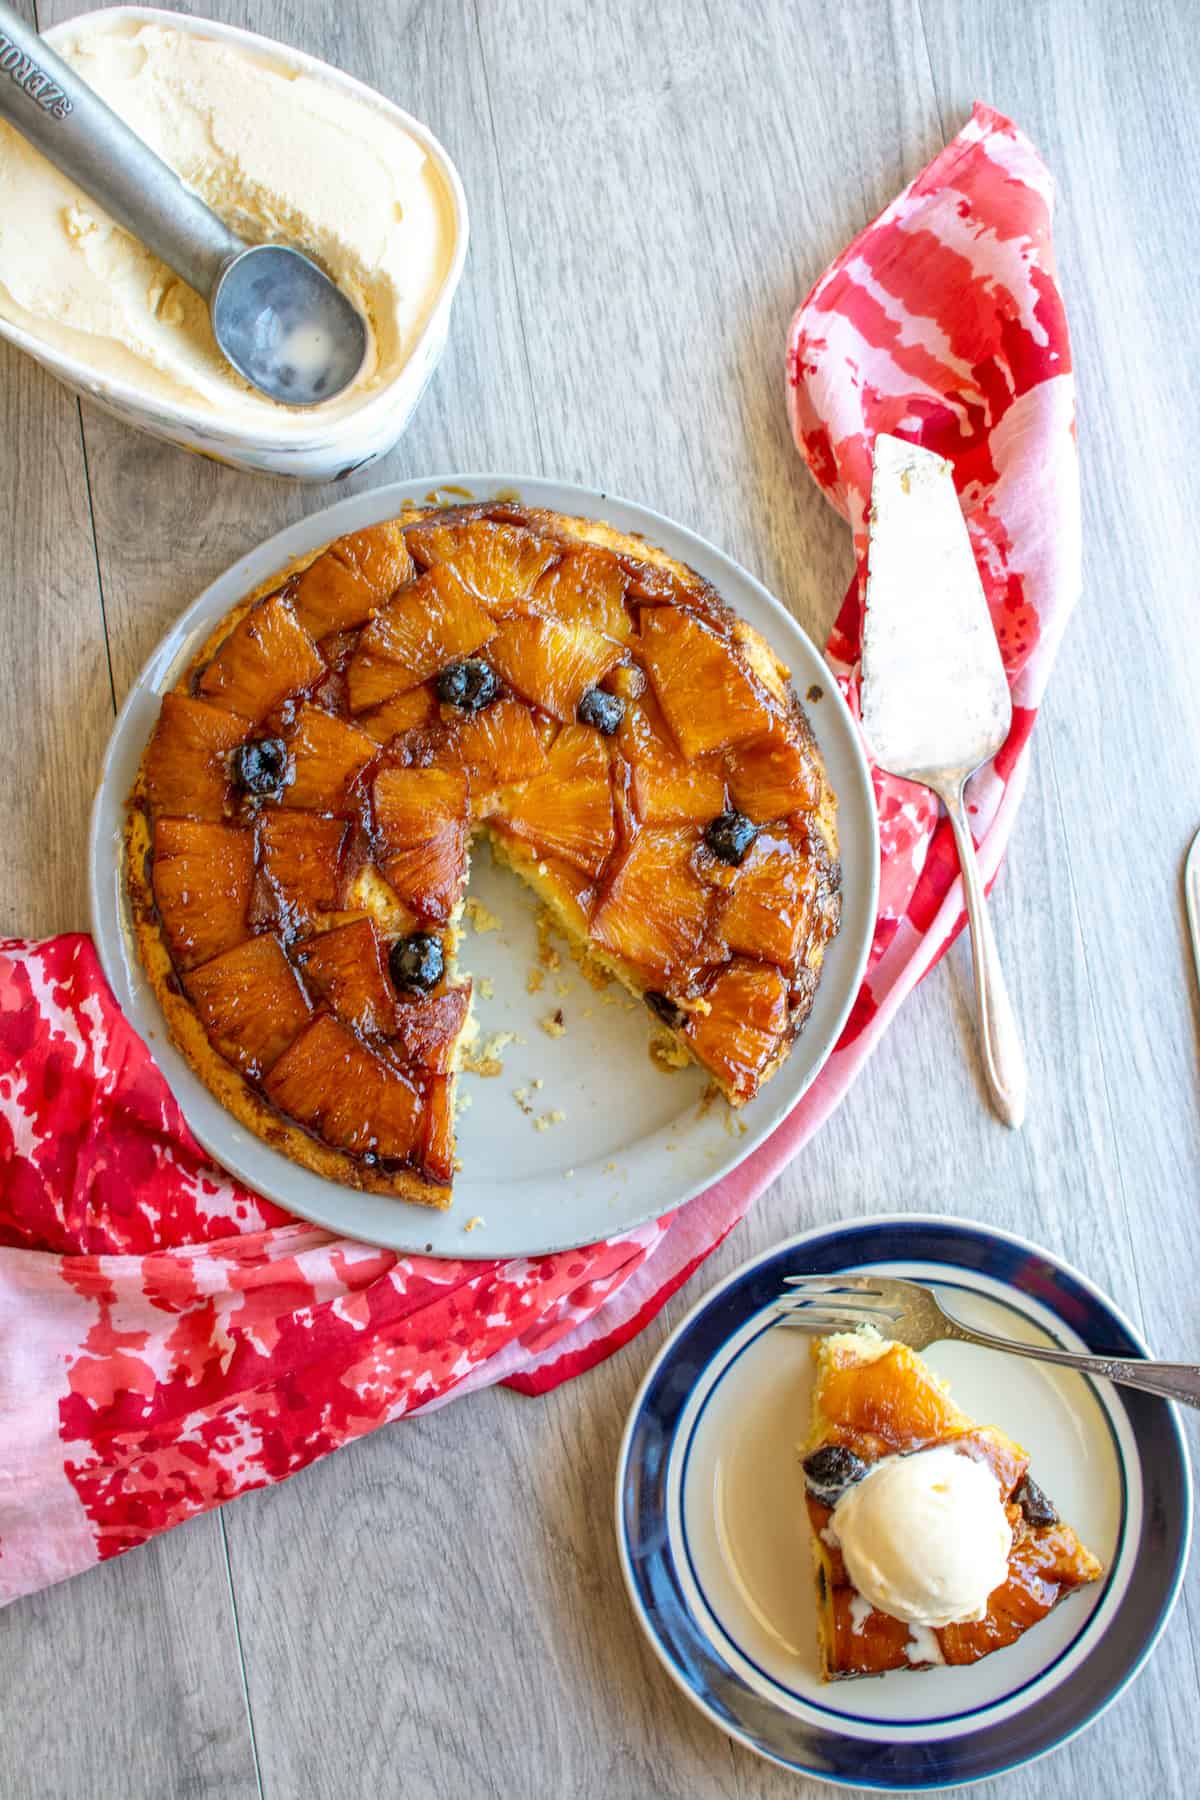 A pineapple upside down cake with a piece cut out and sitting on a plate next to it.